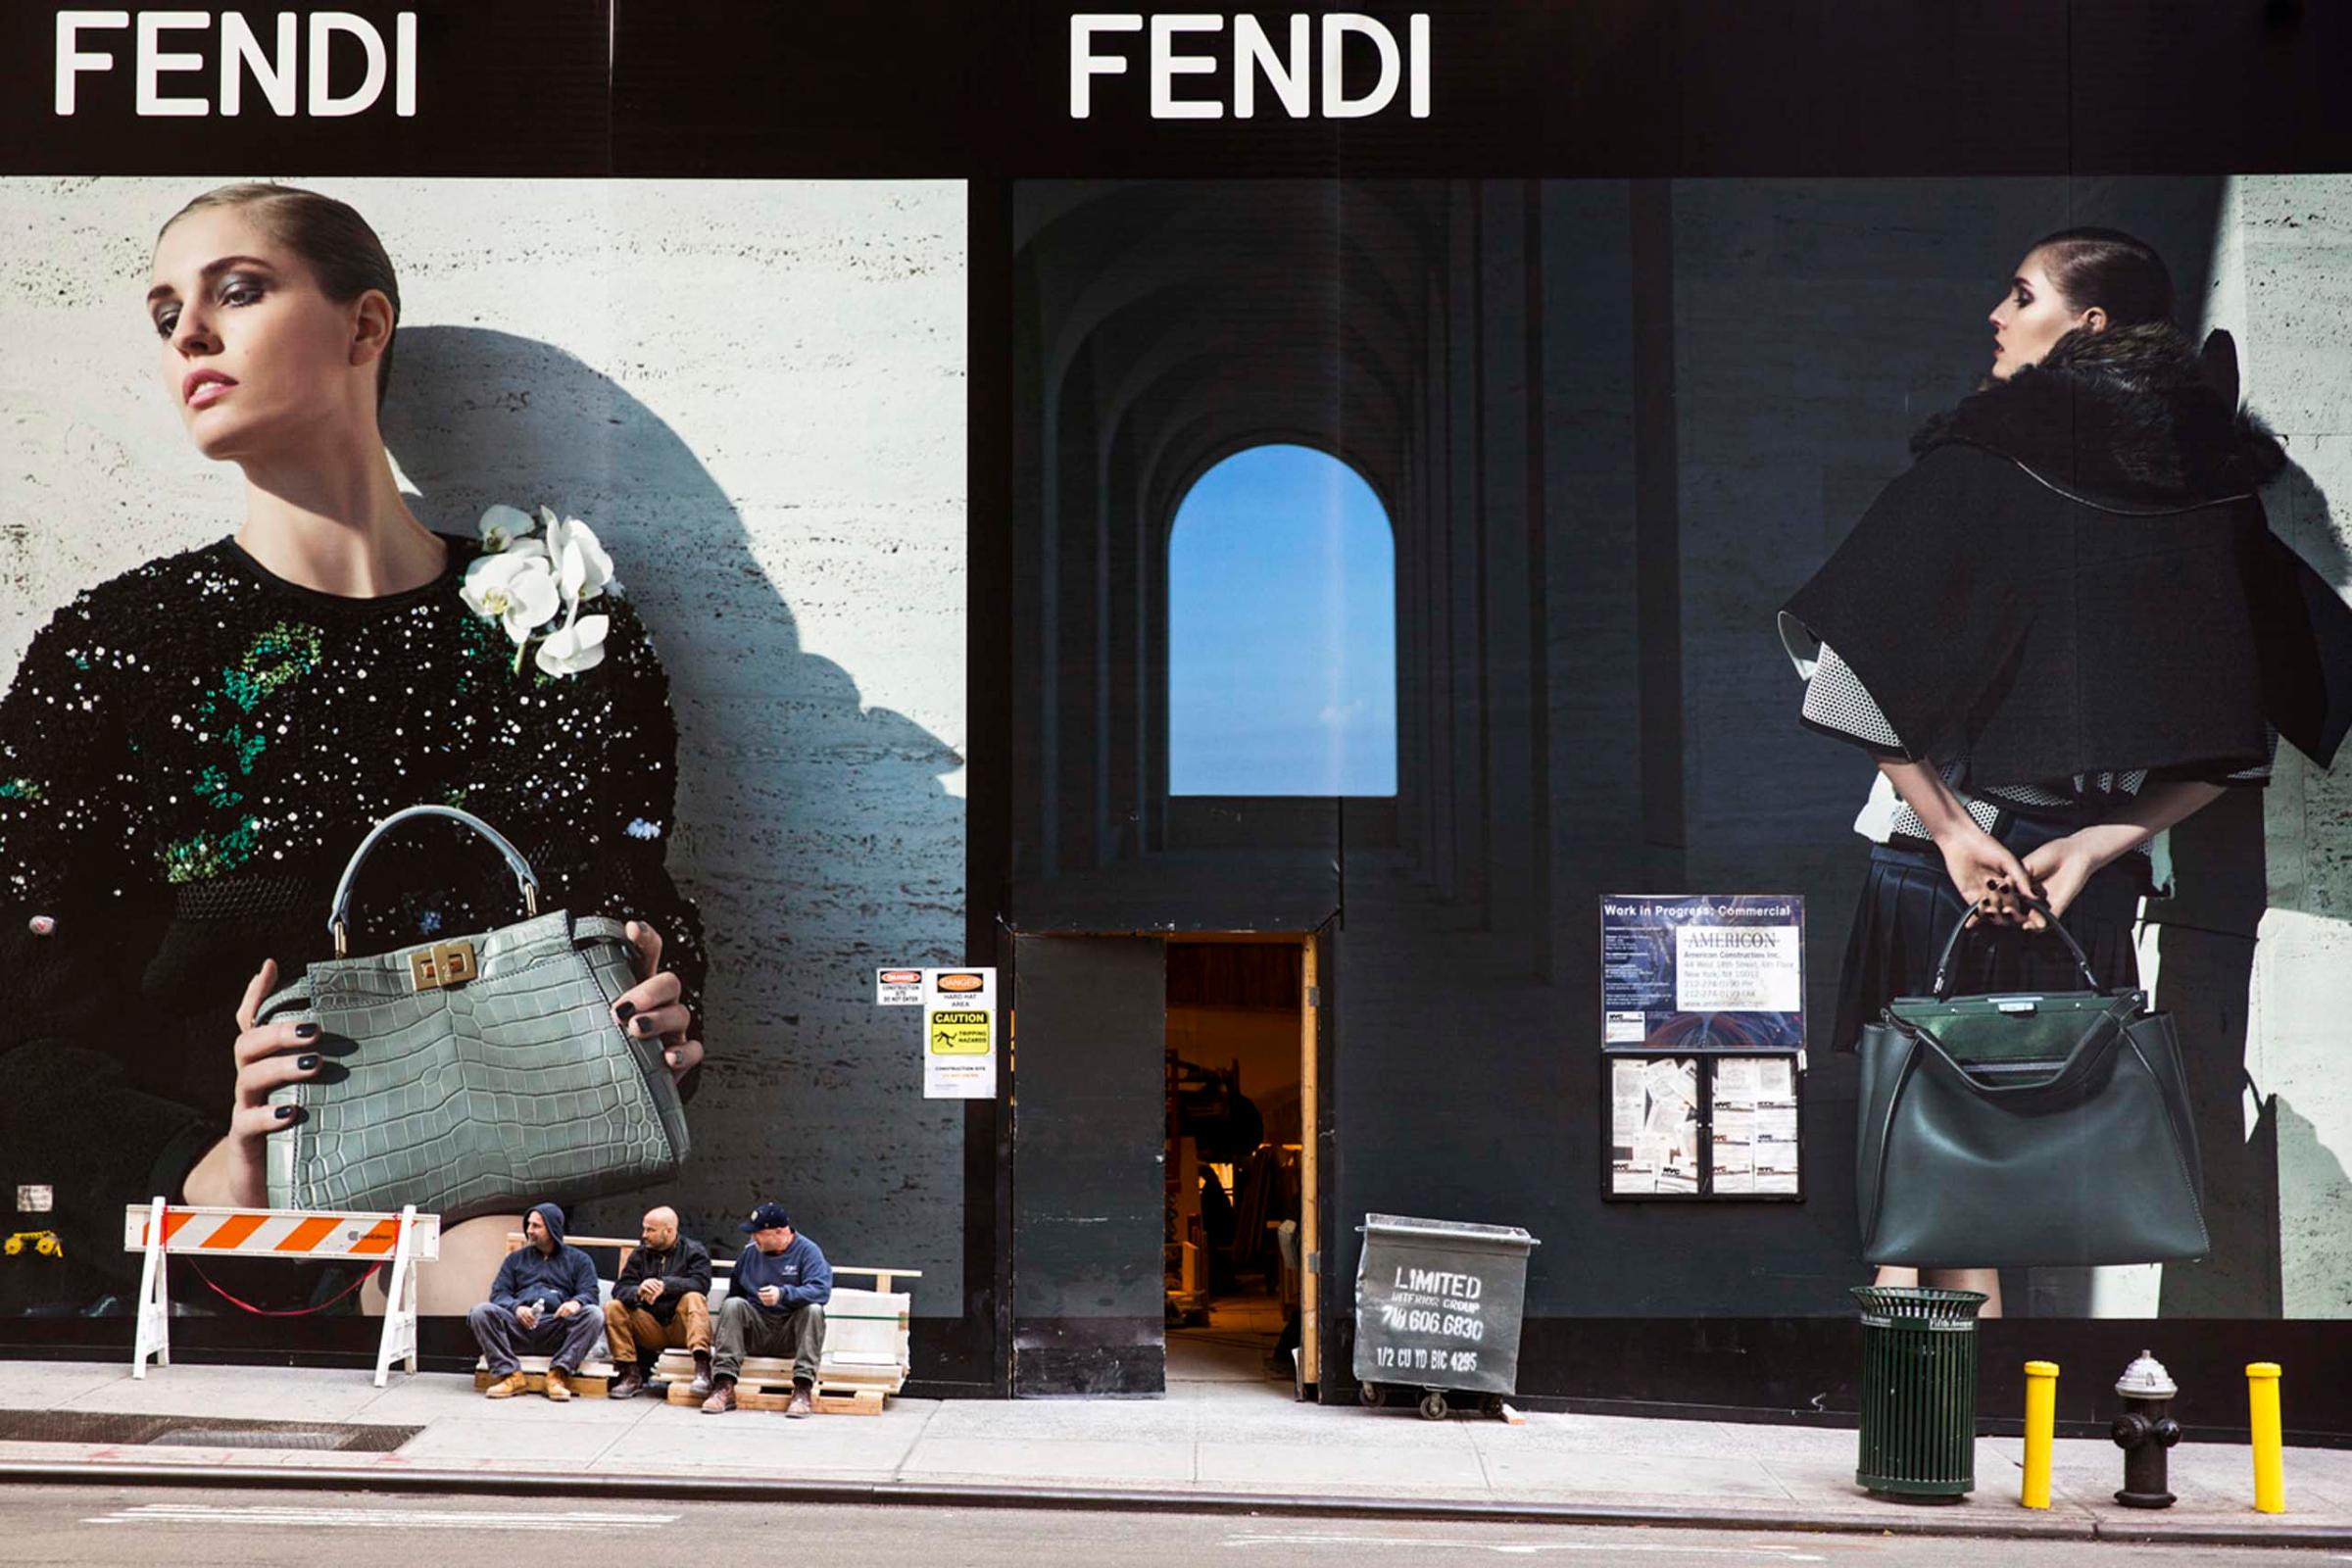 Construction workers take a break next to a Fendi billboard on 57th Street and Madison Avenue, New York, Oct 30, 2014.